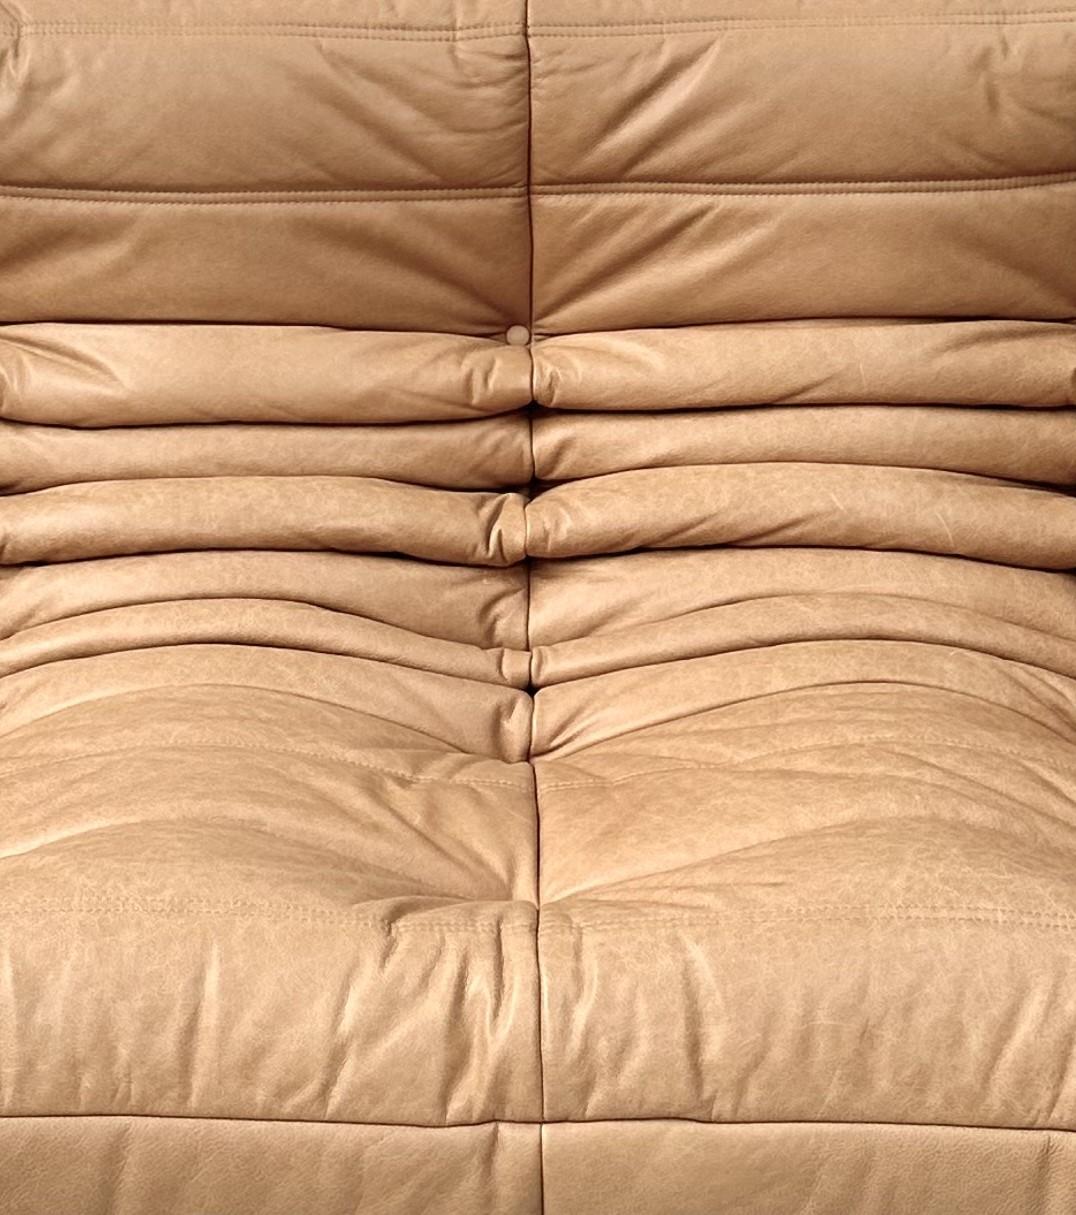 Mid-Century Modern French Vintage Togo Sofa in Camel Leather by Michel Ducaroy for Ligne Roset.